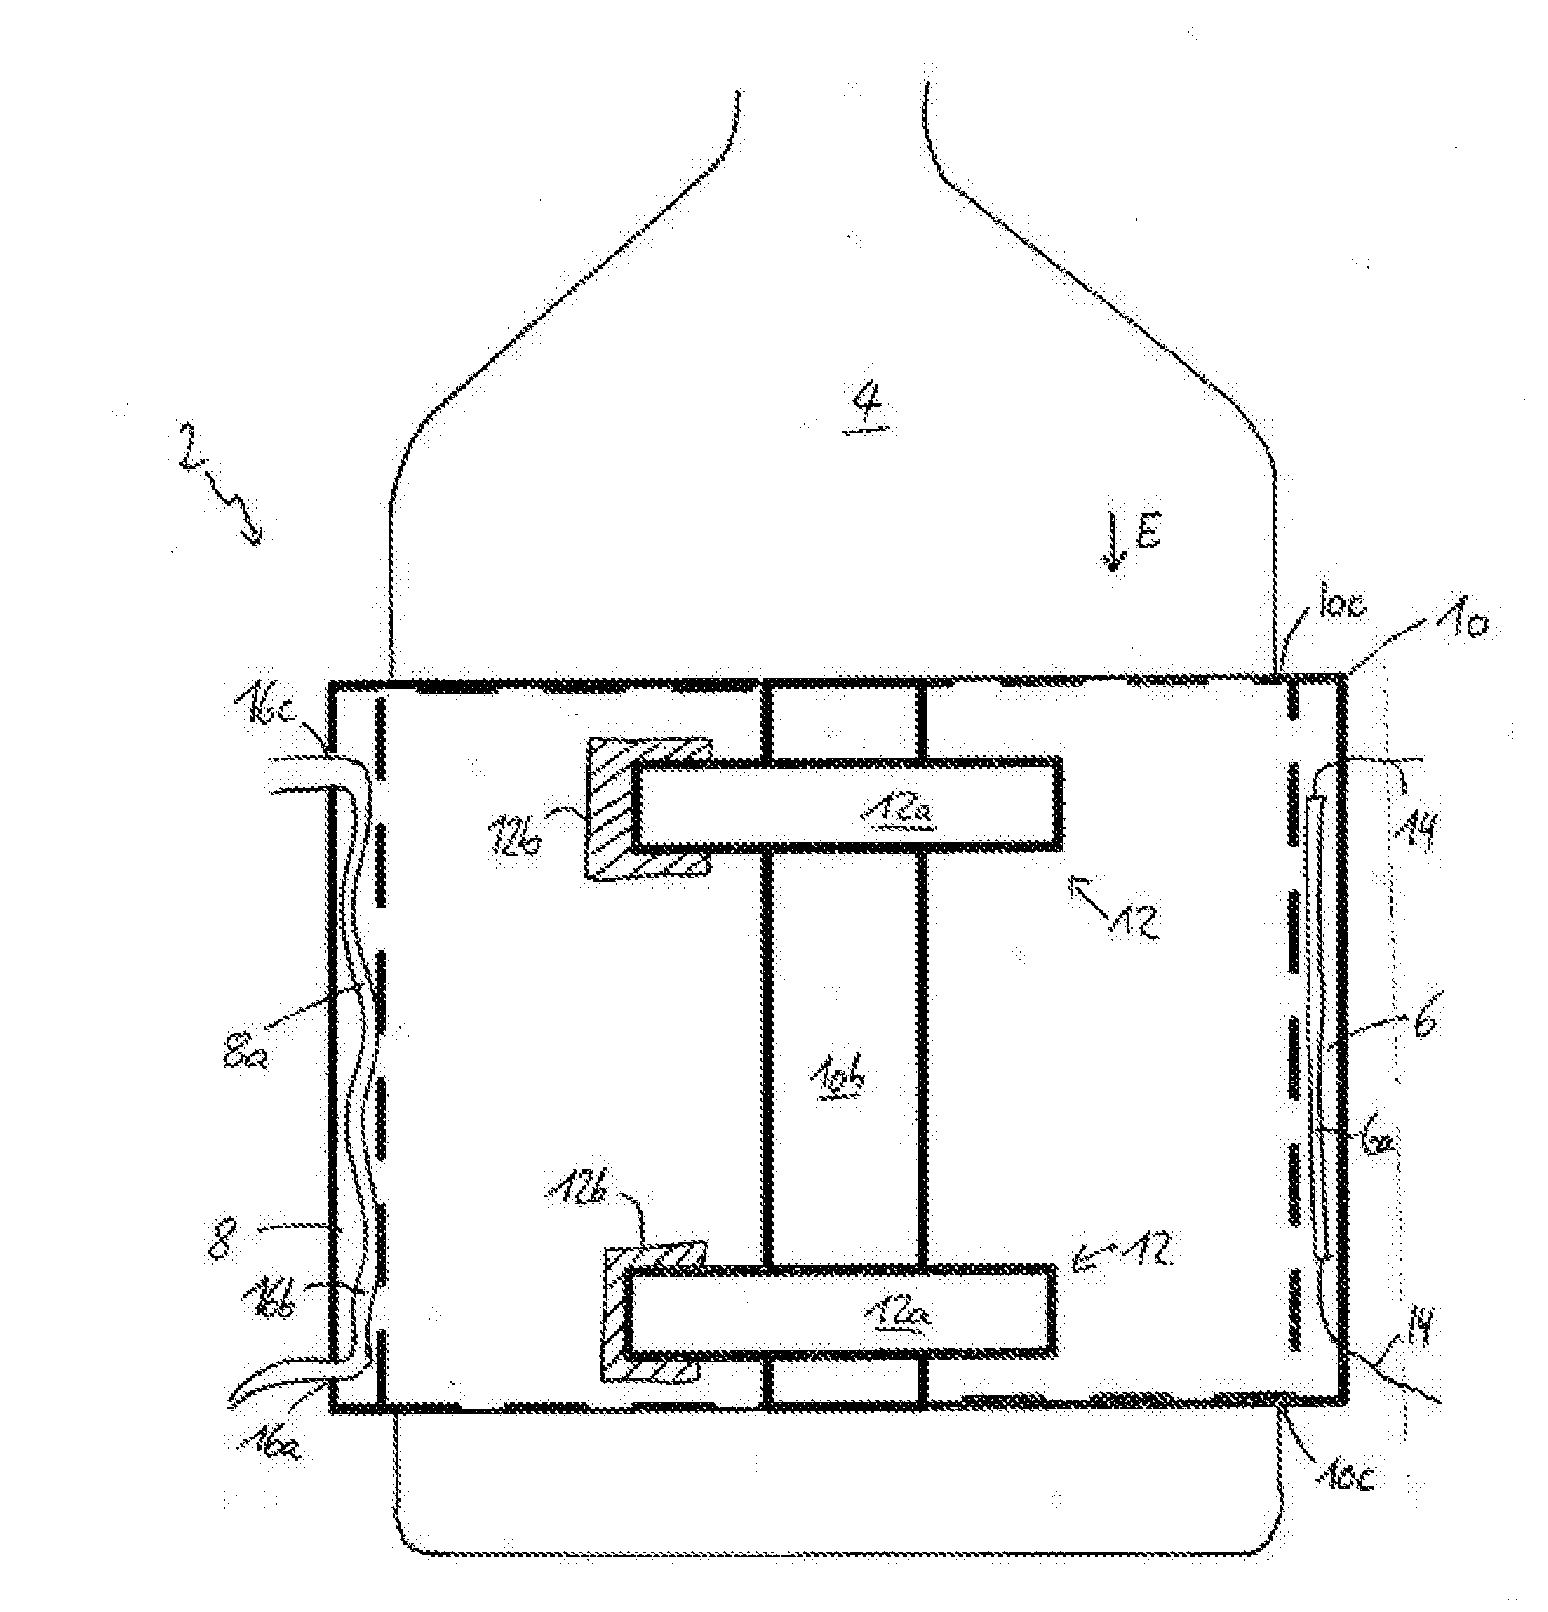 Temperature control device, use and arrangement